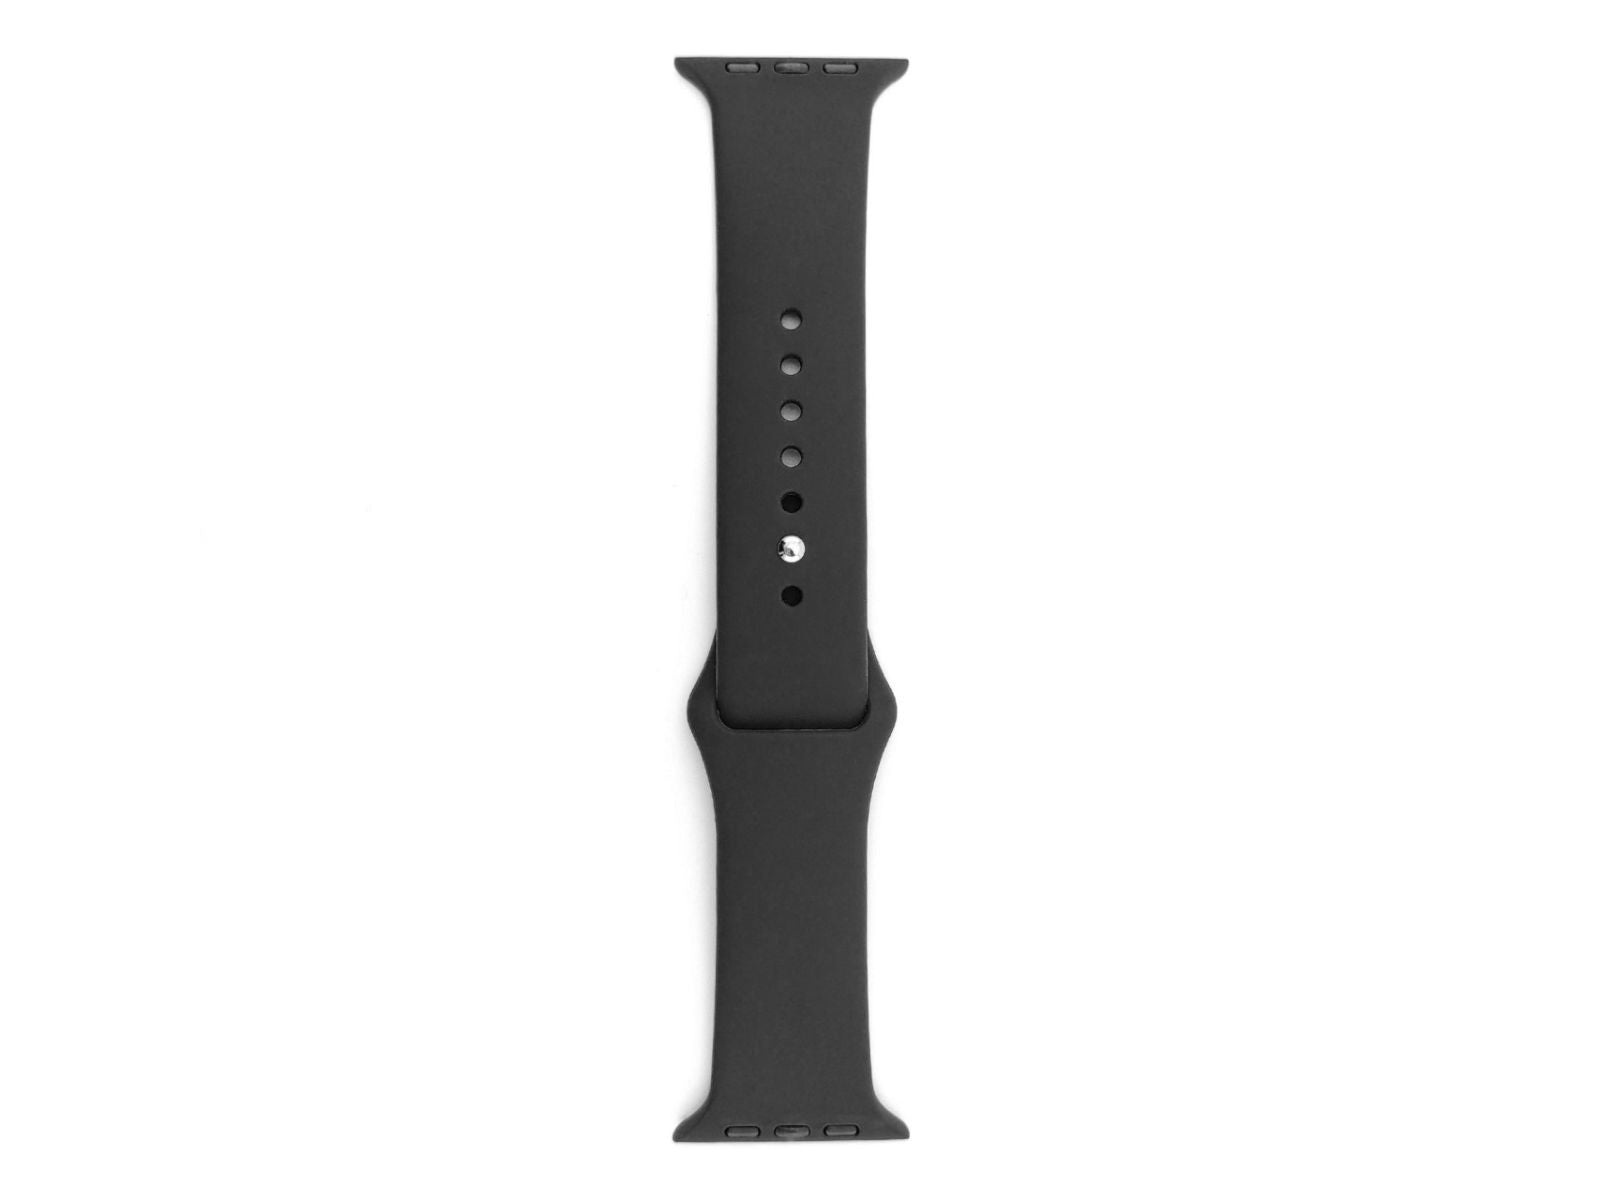 Image shows an overhead view of the black apple watch strap